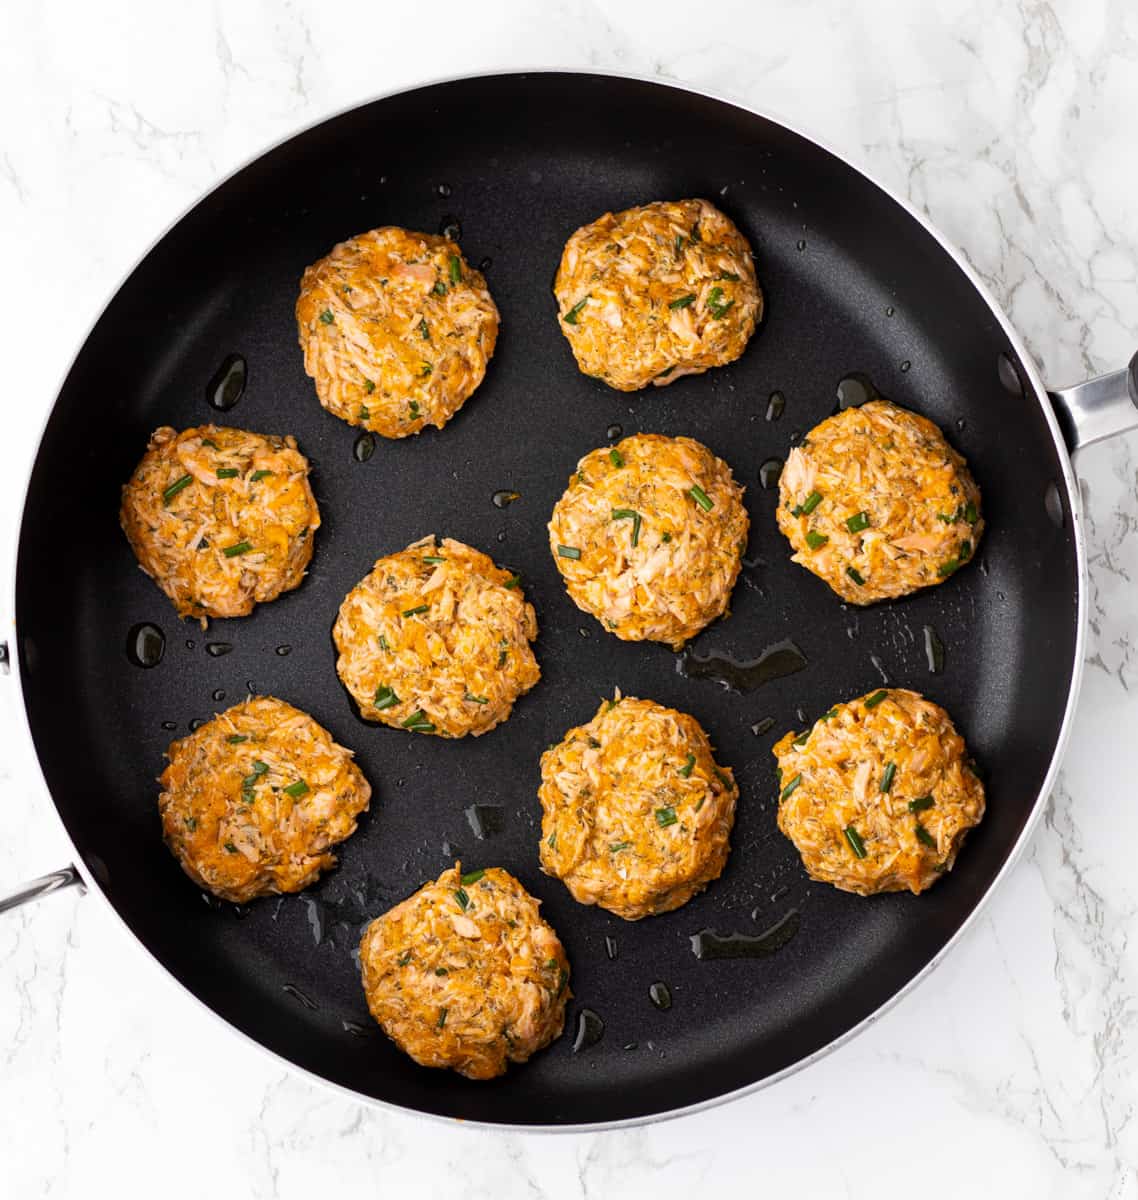 Salmon cakes cooking in a skillet.